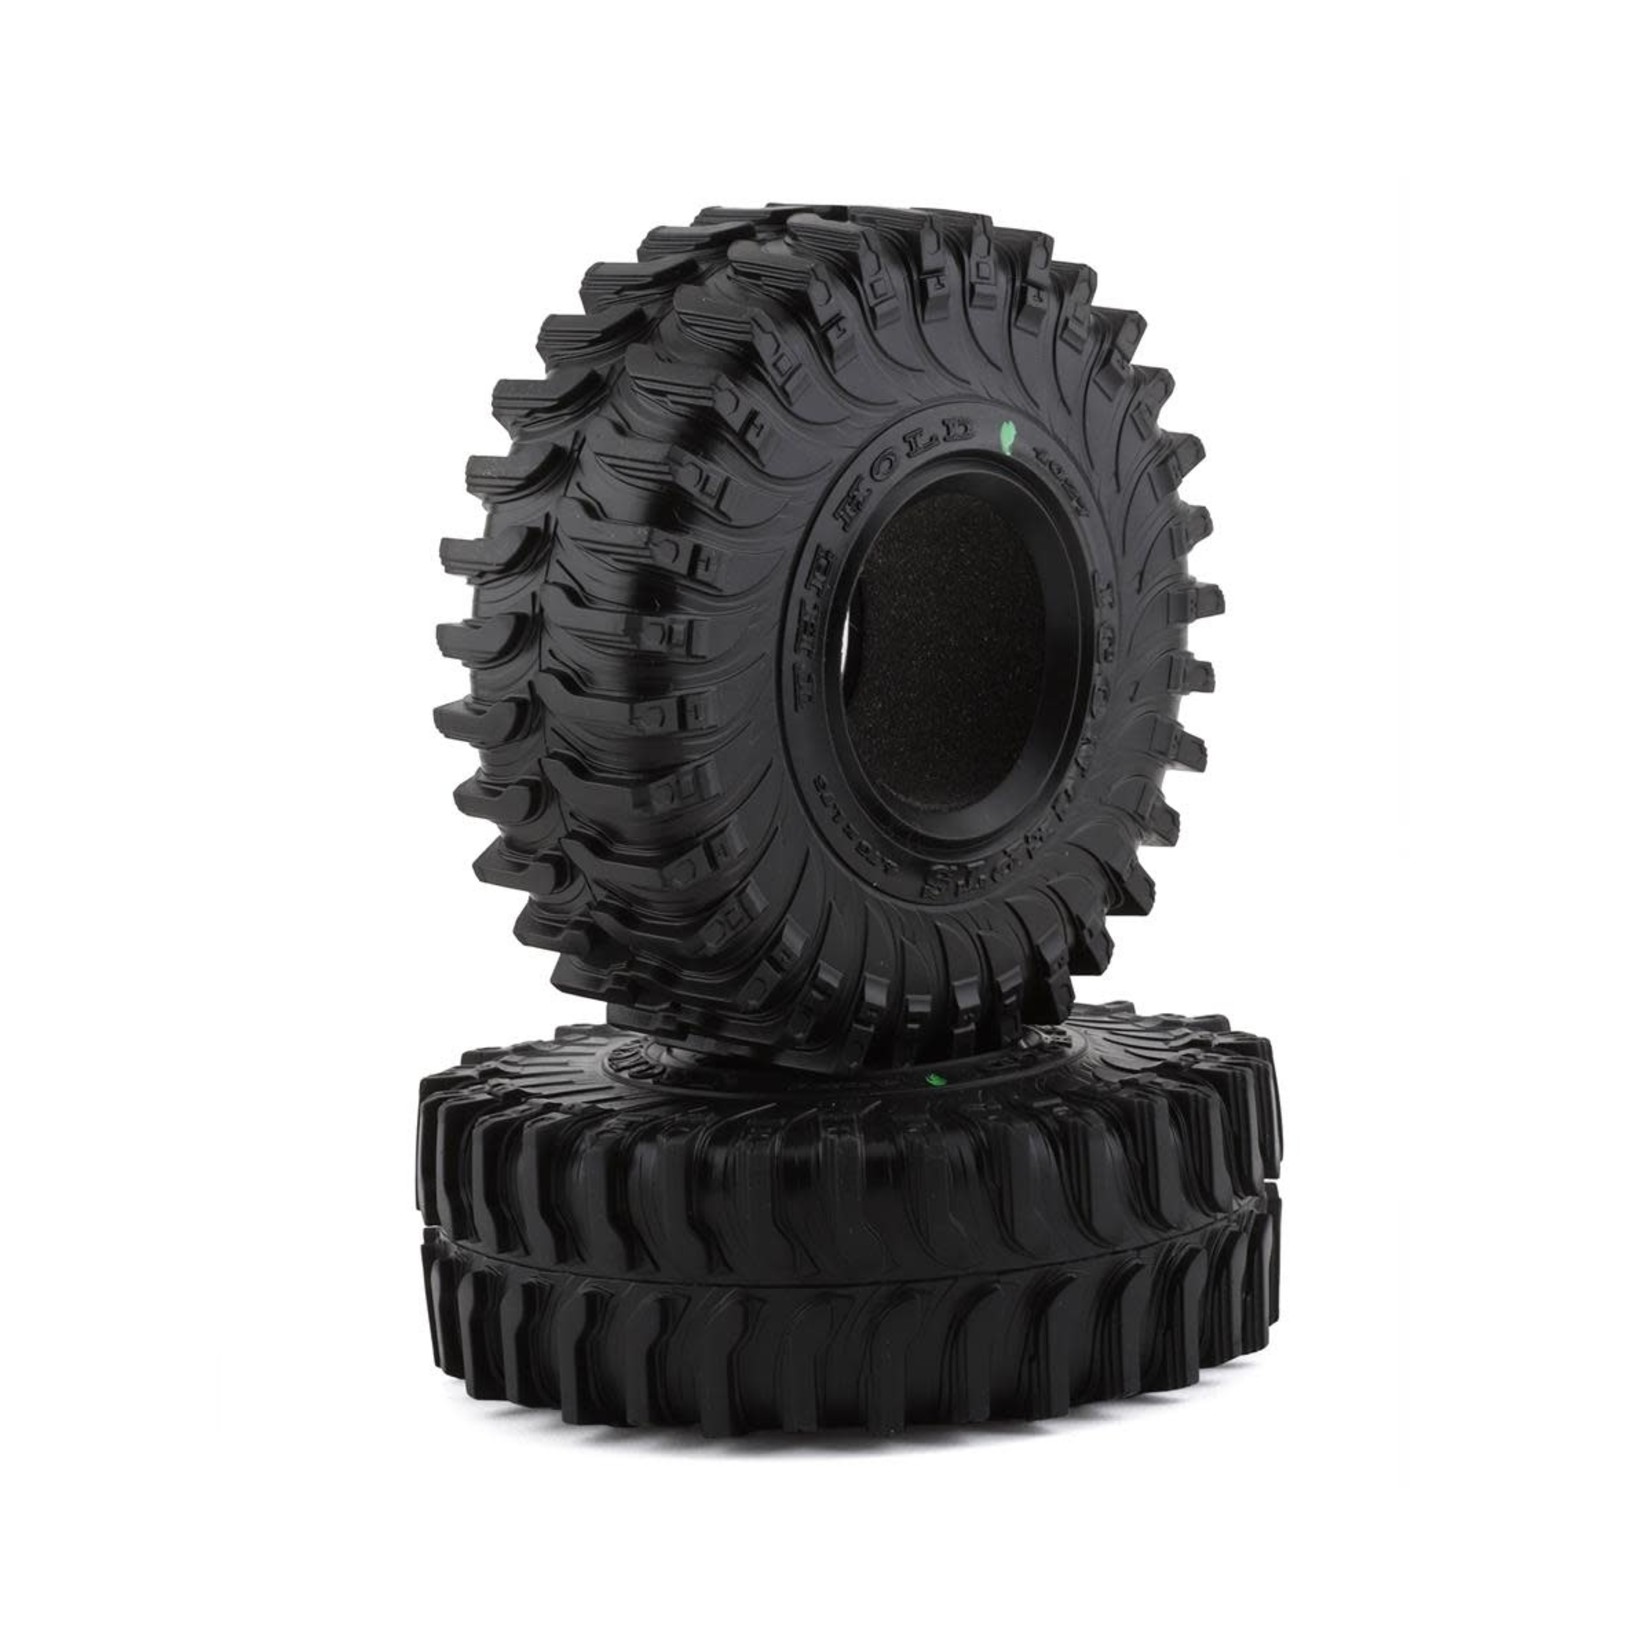 JConcepts JConcepts The Hold 1.9" Rock Crawler Tires (2) (Green) #4027-02